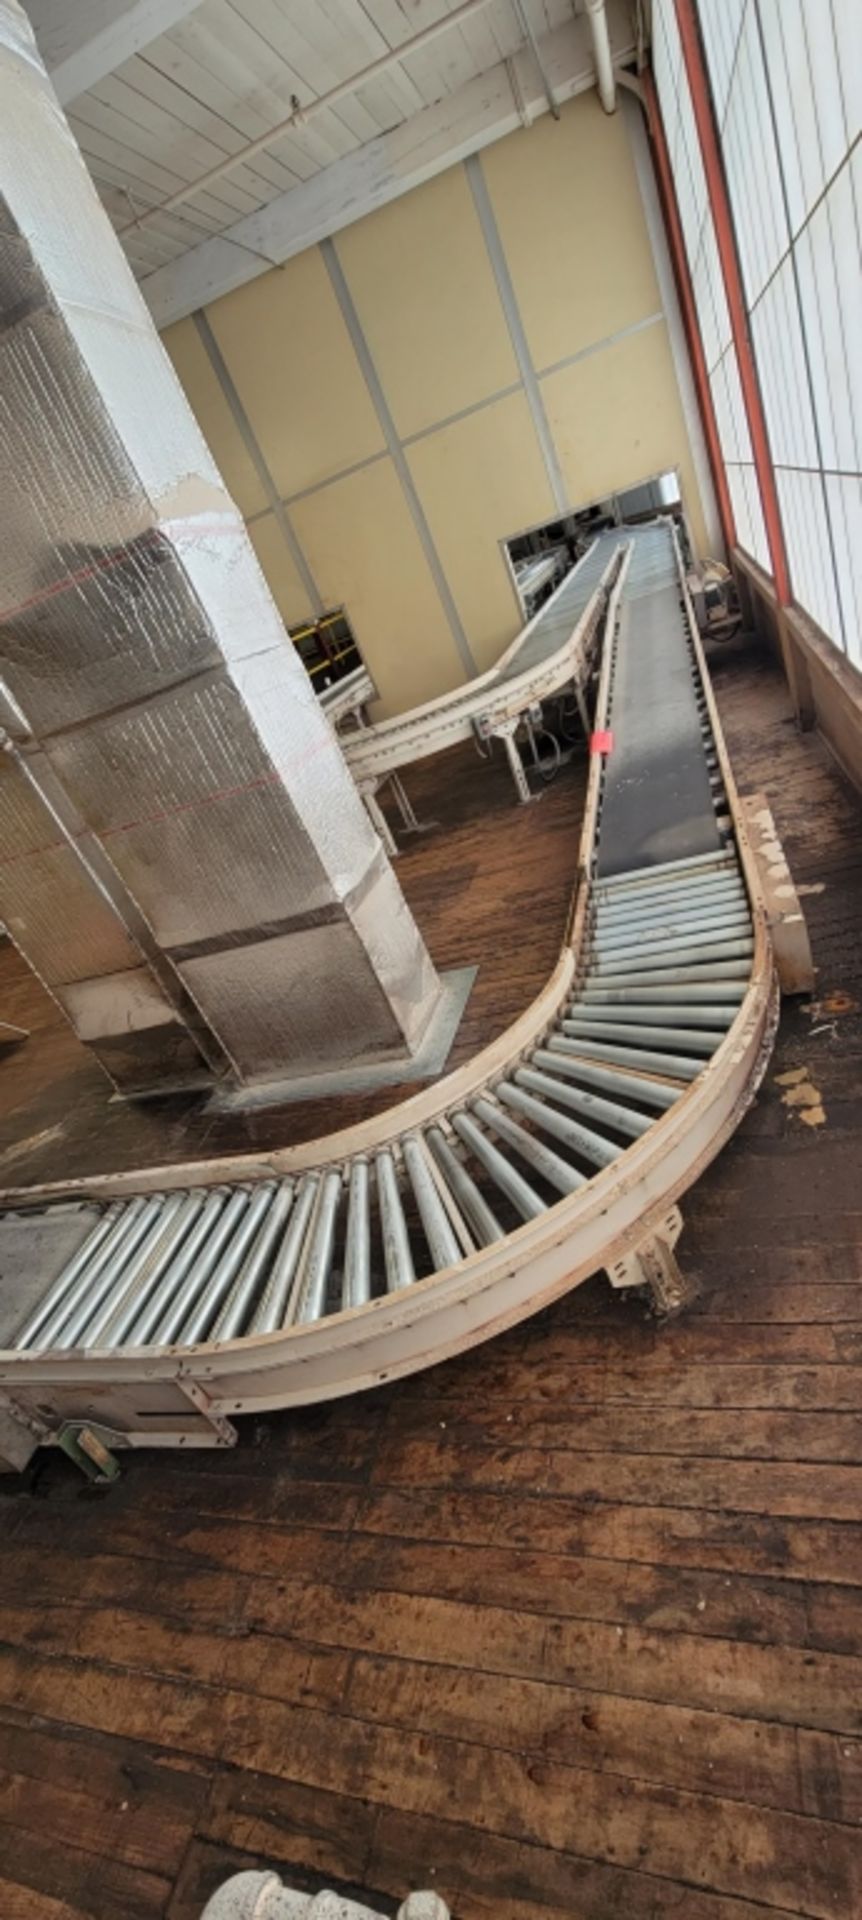 Buschman Inclined Conveyor System - BULK BID FOR LOTS 1118 TO 1125 - Image 4 of 12